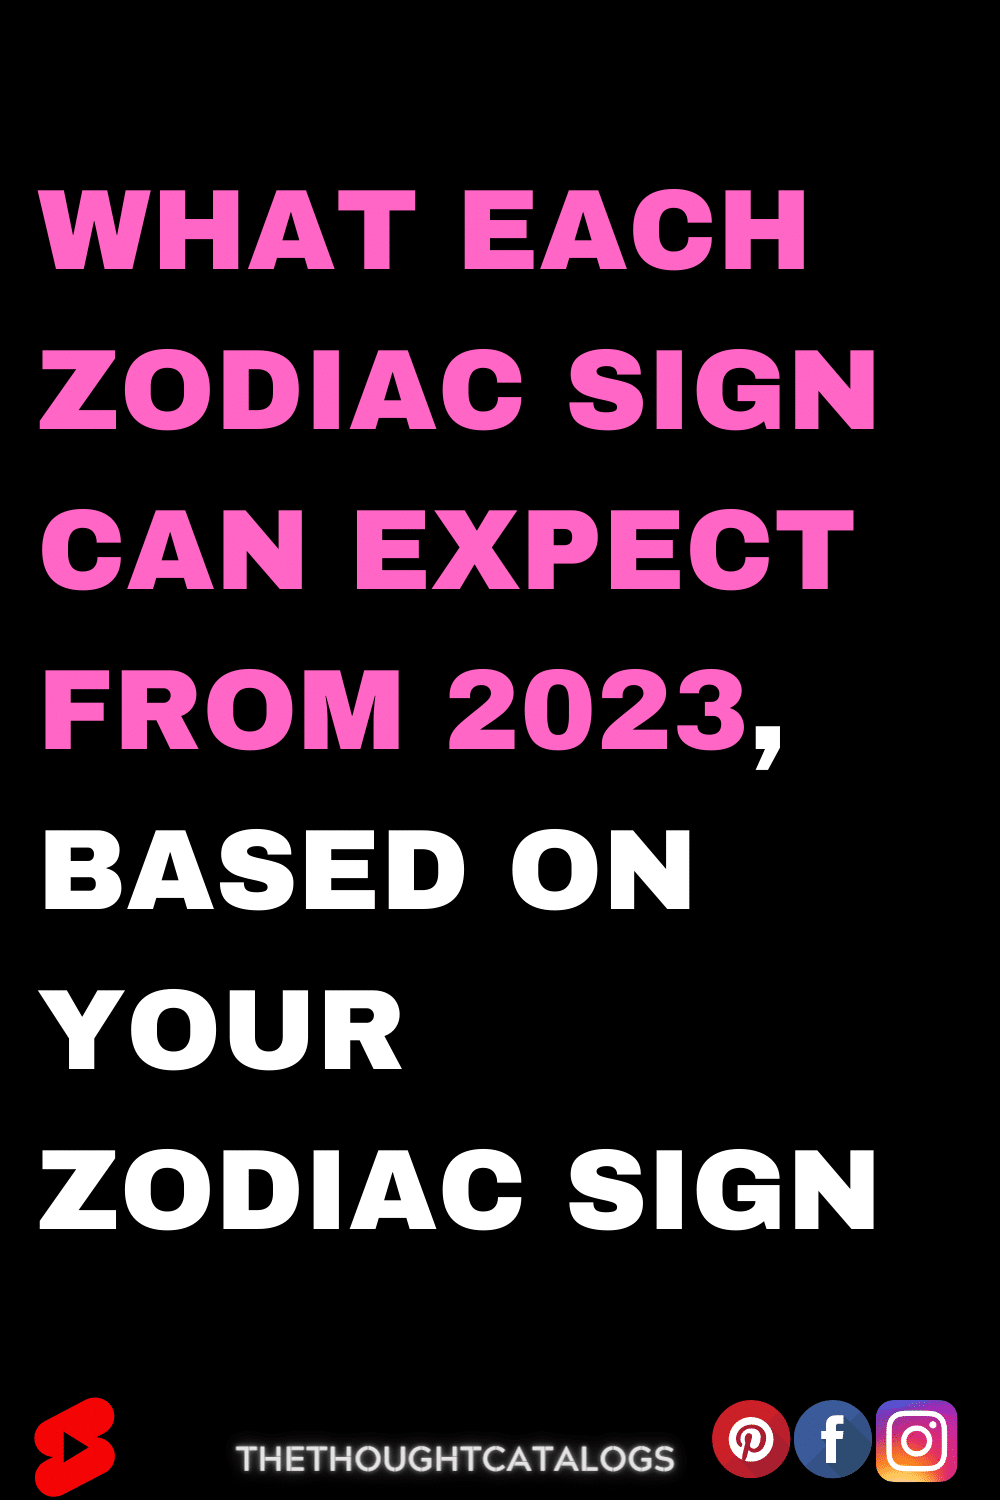 What Each Zodiac Sign Can Expect From 2023, Based On Your Zodiac Sign